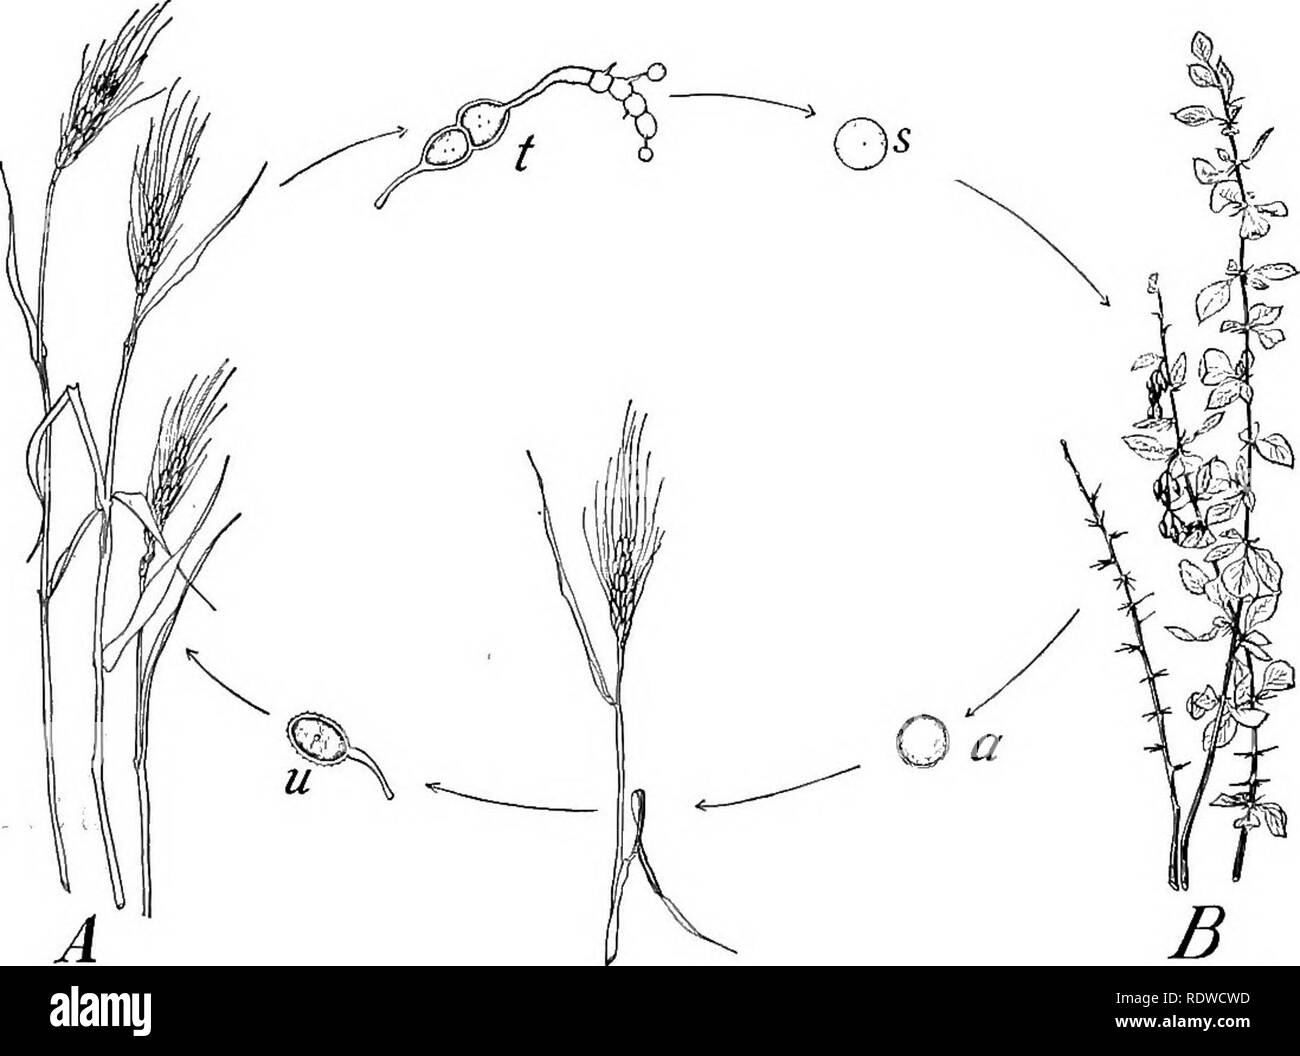 . Botany, with agricultural applications. Botany. Fig. 356. — Stage of the Wheat Rust on the Barberry bush, Berberis wlgaris. Left, leaf of Barberry, showing the affected areas which are red- dish, much thickened, and contain many cup-like depressions; right, a very much enlarged section through the affected area of the leaf, showing one of the cvips (c) with chains of aeciospores (X 200). The very small spores at (p) are the pycniospores.. Fig. 357. —Diagram showing the life cycle of the Wheat Rust. A, wheat plants; B, barberry bush; u, urediniospore; i, teleospore; s, basidiospores; a, aecio Stock Photo